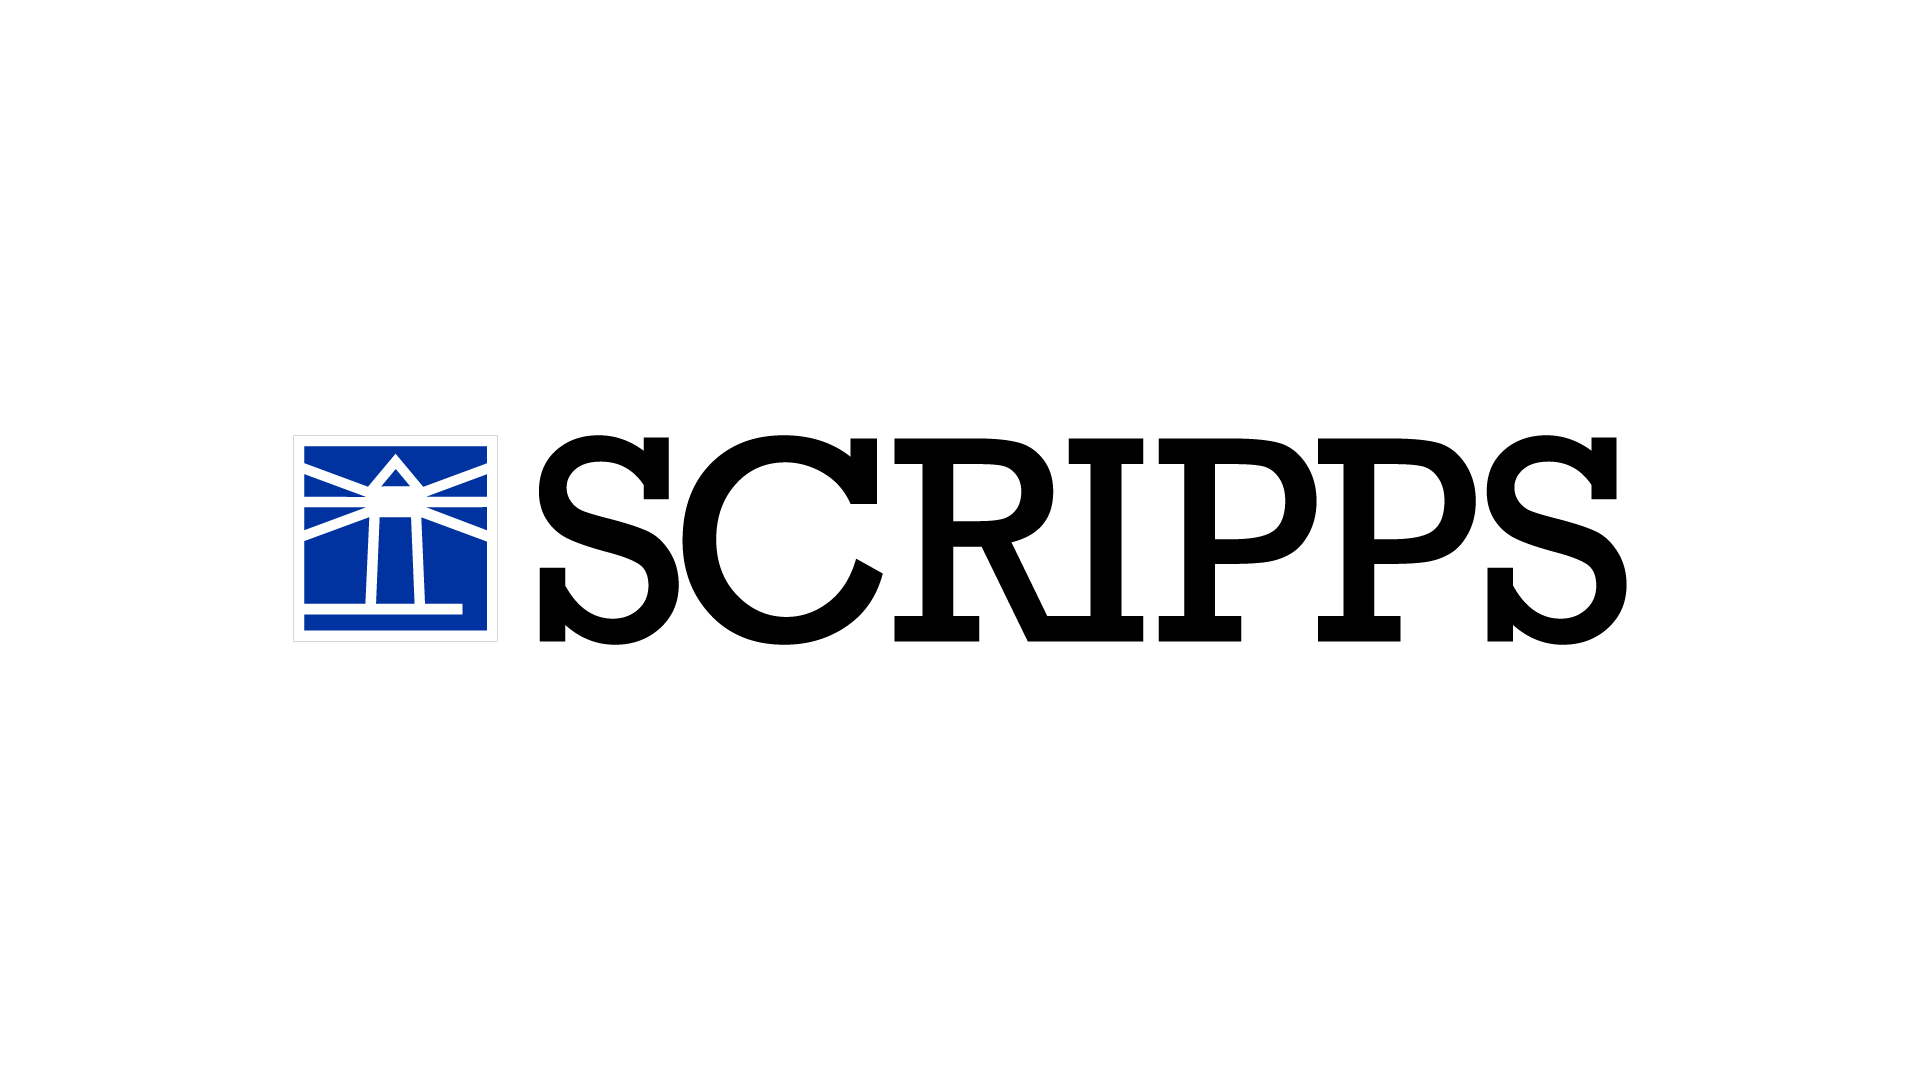 Arizona Coyotes Breaks From Bally Sports, Will Televise Games Over the Air For Free Through Scripps